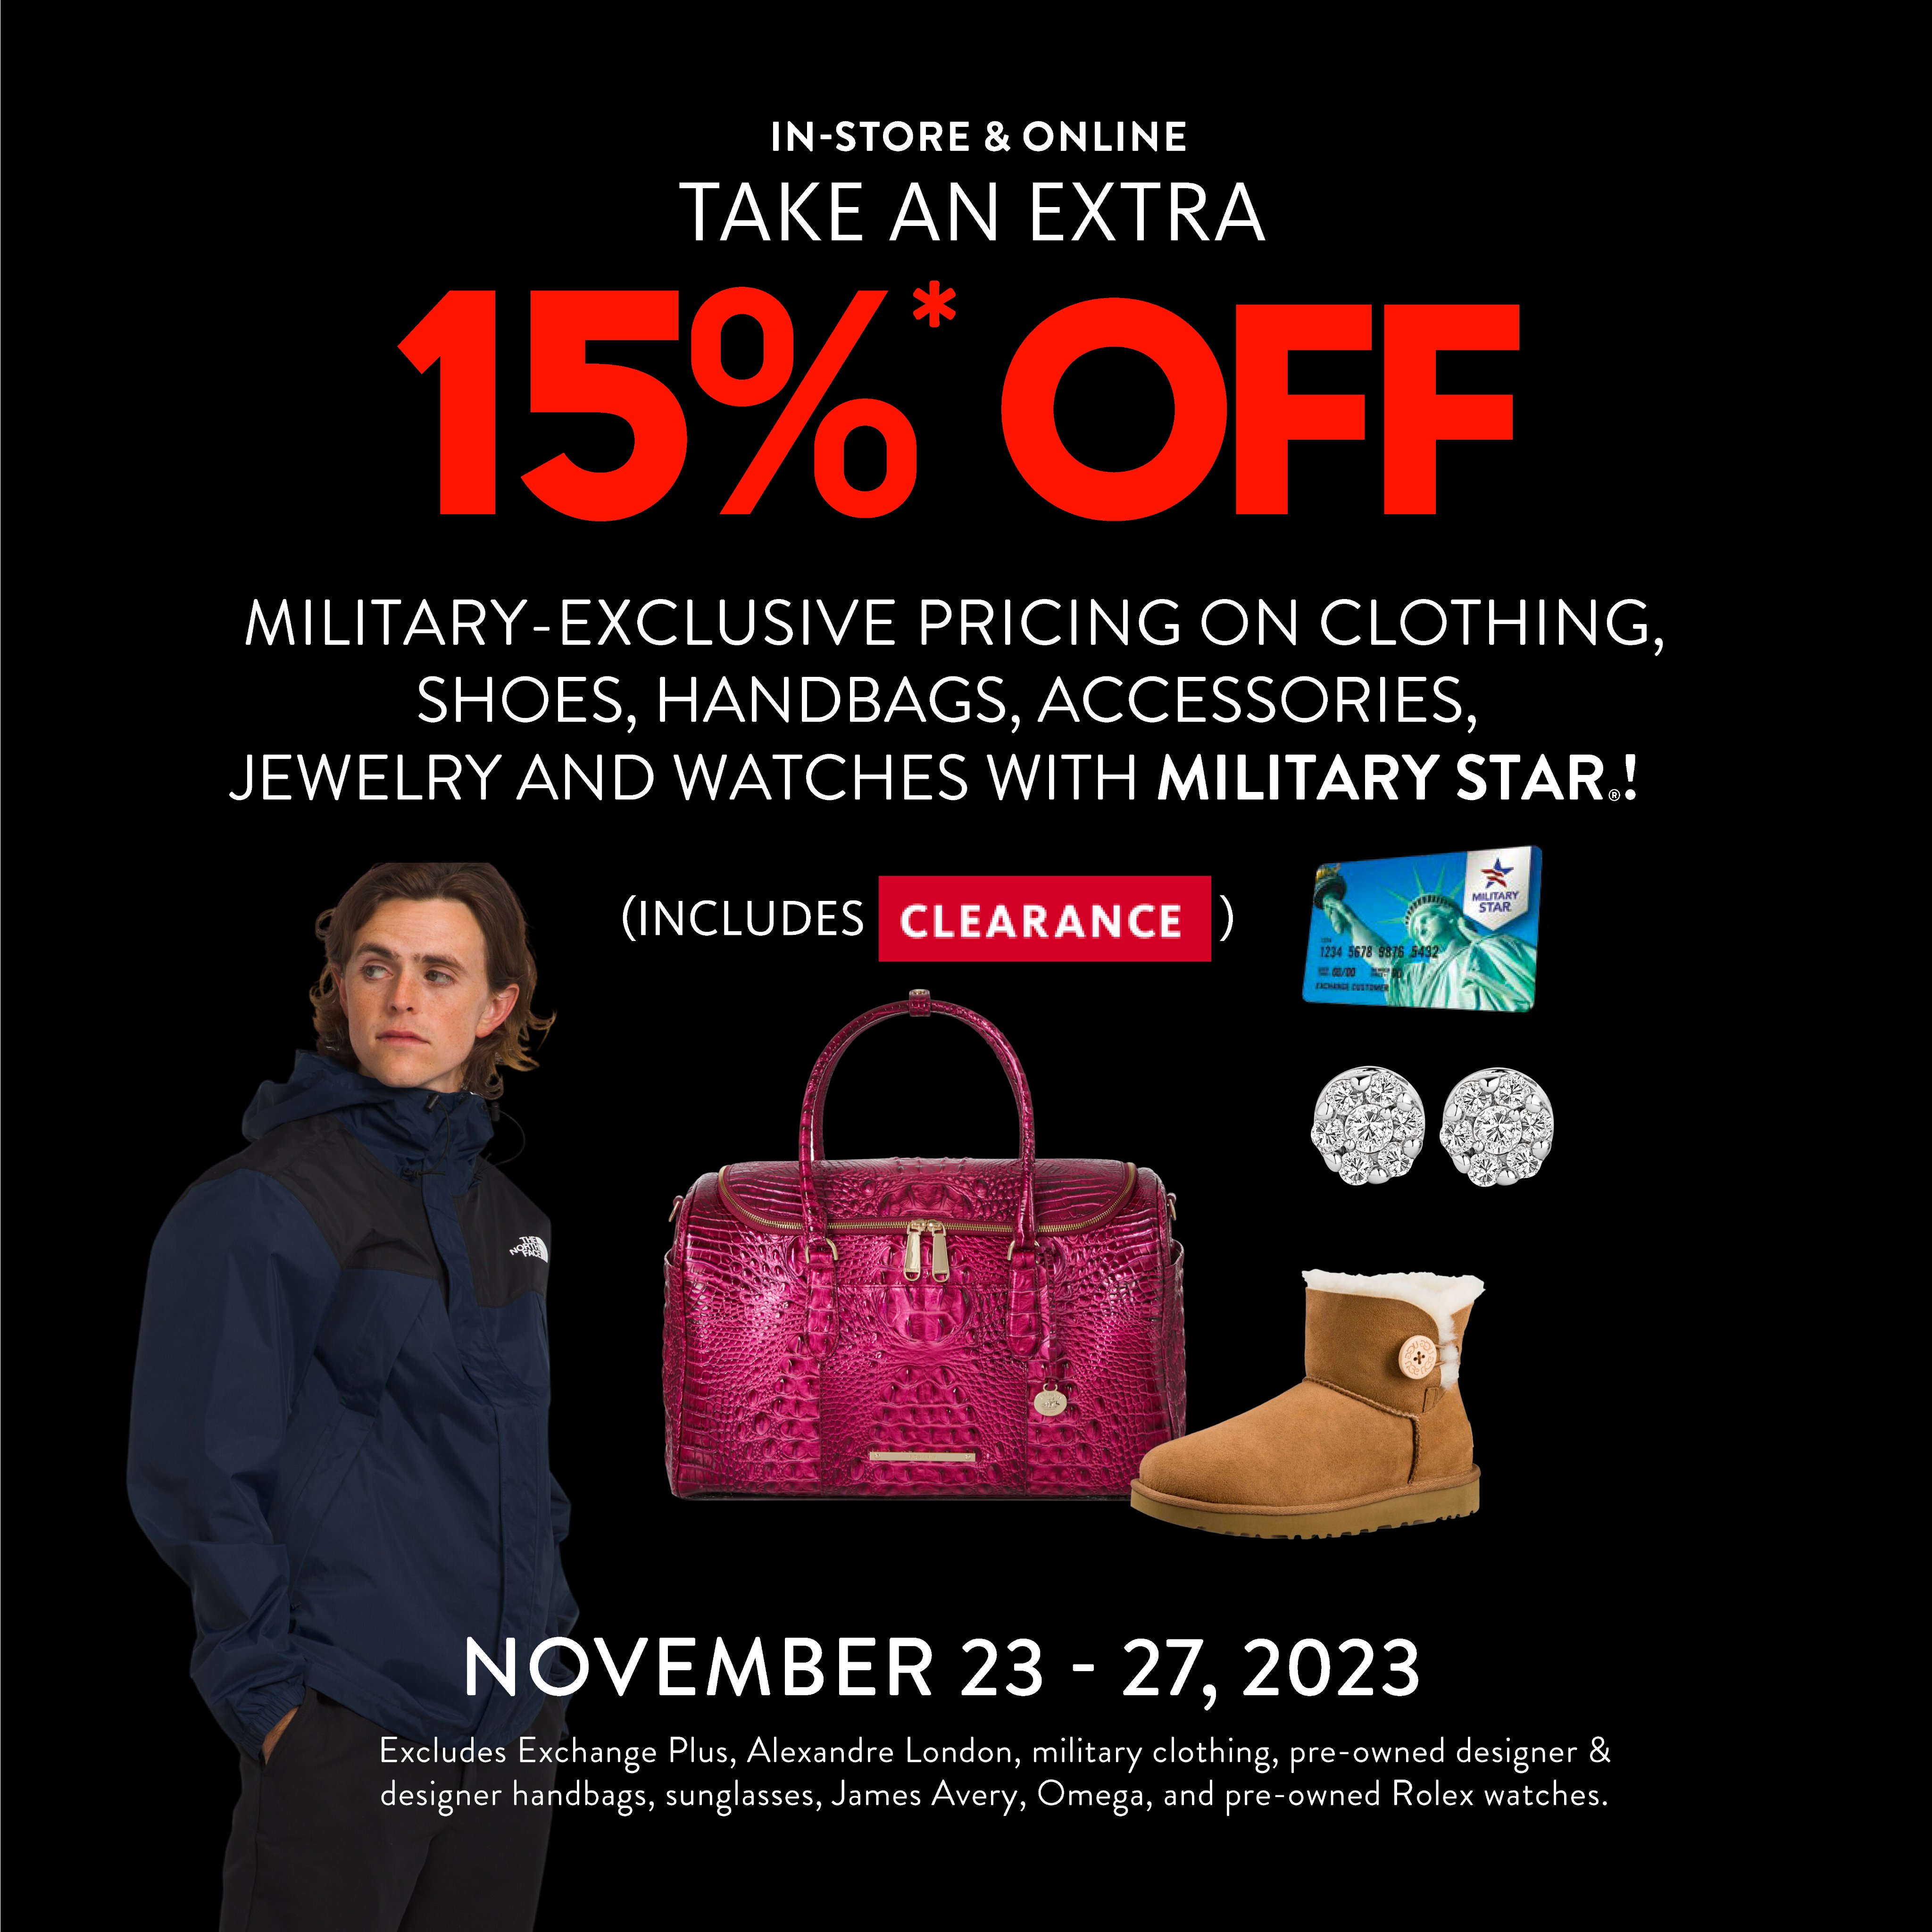 The Exchange on X: Find Black Friday deals and clearance with an